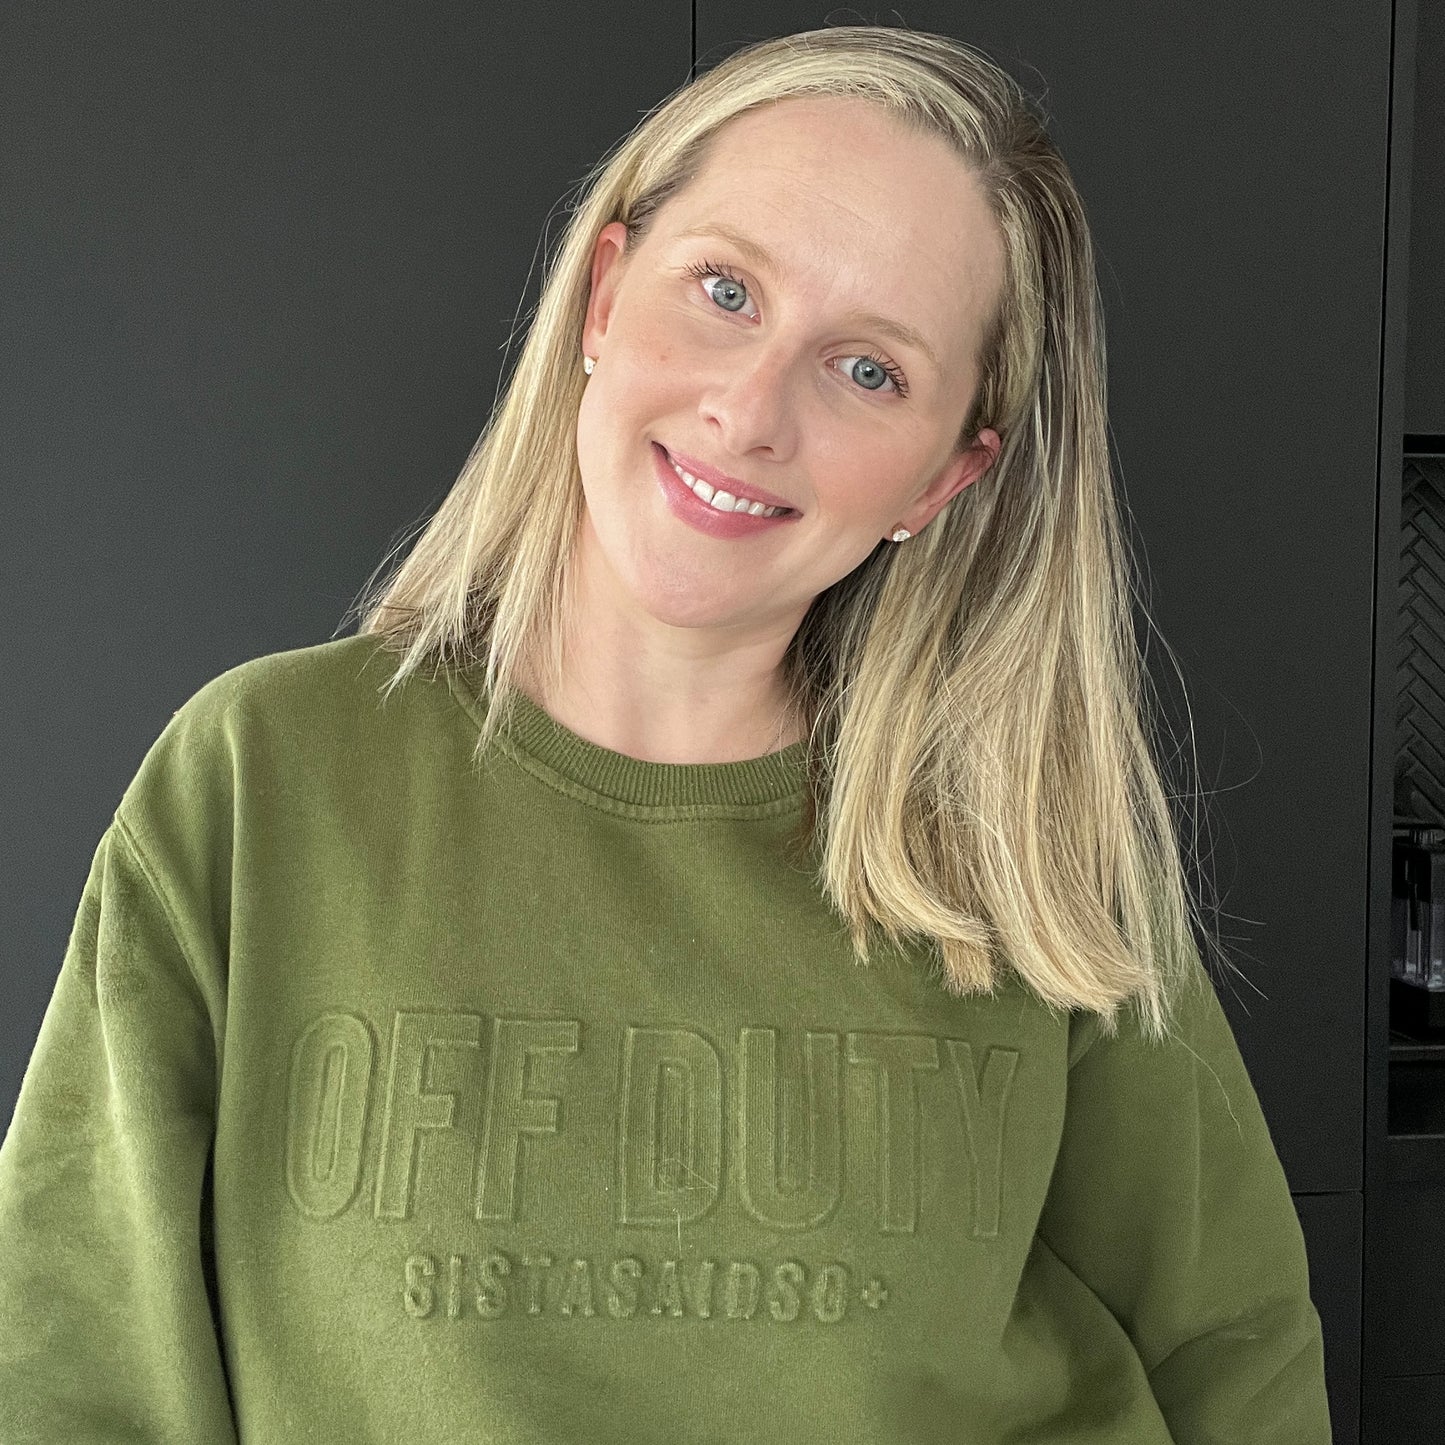 OFF DUTY™️ Unisex Forest Sweater modelled by a nurse